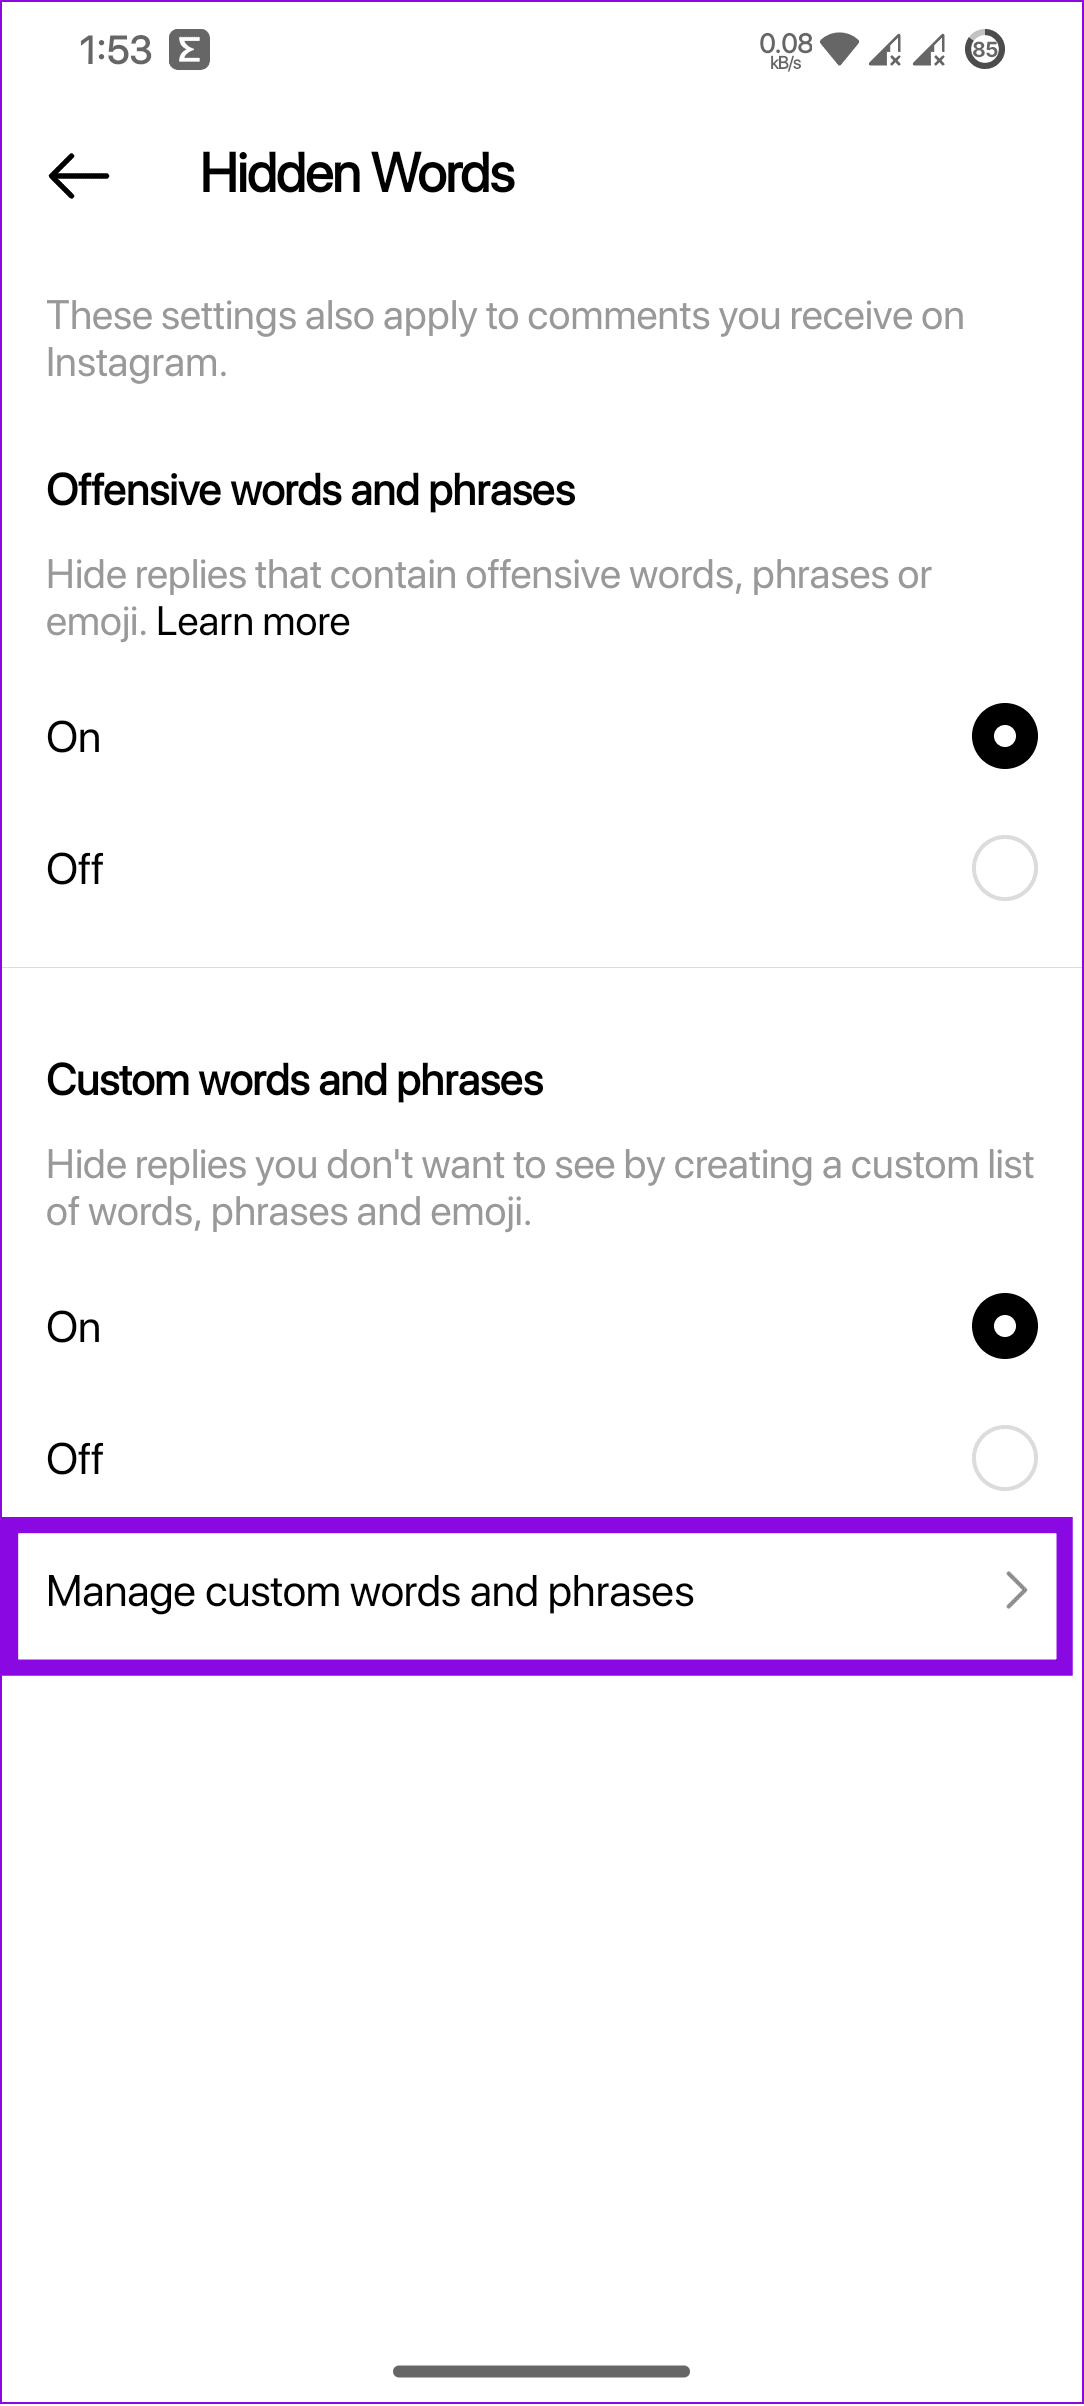 choose manage custom words and phrases